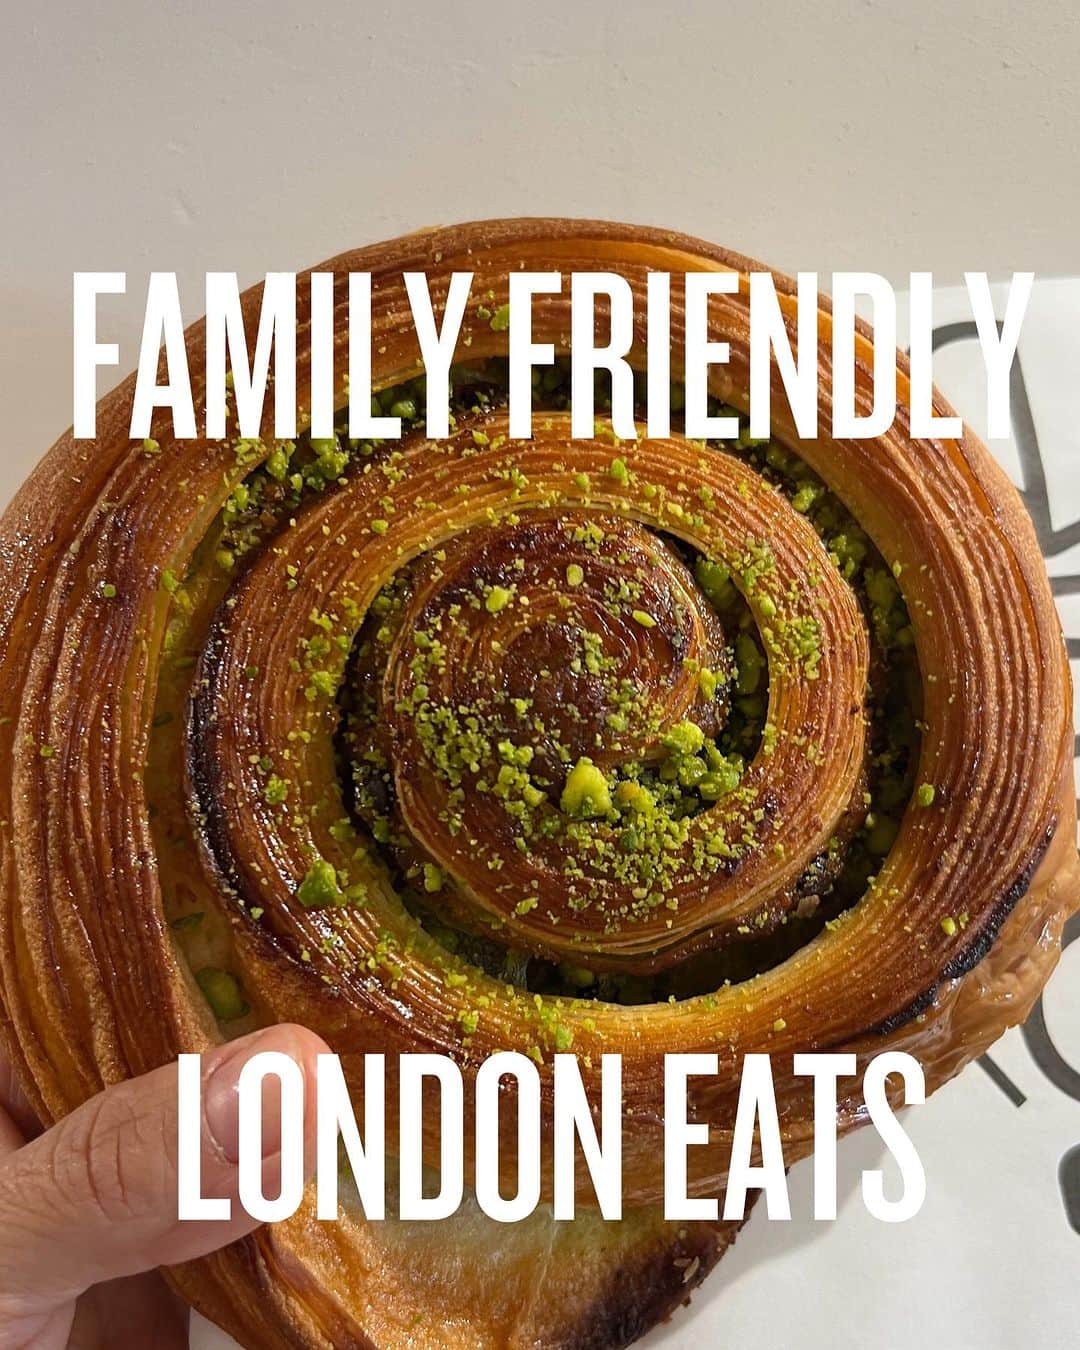 レイチェル・クーのインスタグラム：「Looking for great London restaurants that are family friendly? ❤️  Here’s all the places I visited and why they worked so well for a family of 5 (including 3 under 10!)  1. @aromebakerylondon: masters at creating the most delicious pistachio pastry - lots of other sweet treats which went down very well with the kids  2. @ampersandhotel (invite): their Jurassic park themed afternoon tea was also a big hit (AKA dino sandwiches!) Definitely book in advance, especially at the weekends, for this one  3. @arepandco: literally opposite the @young.vam, they are very accommodating towards kids and strollers. Their arepa pabellon is a highlight here  4. @wigmorelondon (invite): an absolutely stunning pub located off Oxford Circus (so you can recover from Hamleys in here!) I’d highly recommend their scotch egg with an oozy yolk on a dahl relish  5. @bigmamma.uk: their newest restaurant Carlotta has a great energy and busy vibe, so the occasional noisy moments from kids goes unnoticed. The Carlotta wedding cake is a must order  6. @comptoirlibanais: great kids menu which is effectively smaller portions of the adults menu. I also enjoyed some leftovers from the kids plates!  7. @dallowayterrace at @hotelbloomsbury (invite): a stunning setting that felt like sitting in an English garden. Really great with kids and even made a fun kids cocktail which went down a treat (glammed up orange juice!)  8. @lechouxlondon: the chocolate chip cookies were, according to a 10 year old, "the best he had ever eaten". The promise of something sweet always works!  9. @linastores: lovely delicatessen where I enjoyed a gorgeous chocolate mousse. They have seating outside on the pavement which I find always handy when you're having lunch and have a buggy  👉🏻 There’s lots more advice and tips over on my website for family friendly London eats (head to the link in my bio). I’d love to hear your favourite restaurants that accommodate children too - and any other tips you have!」